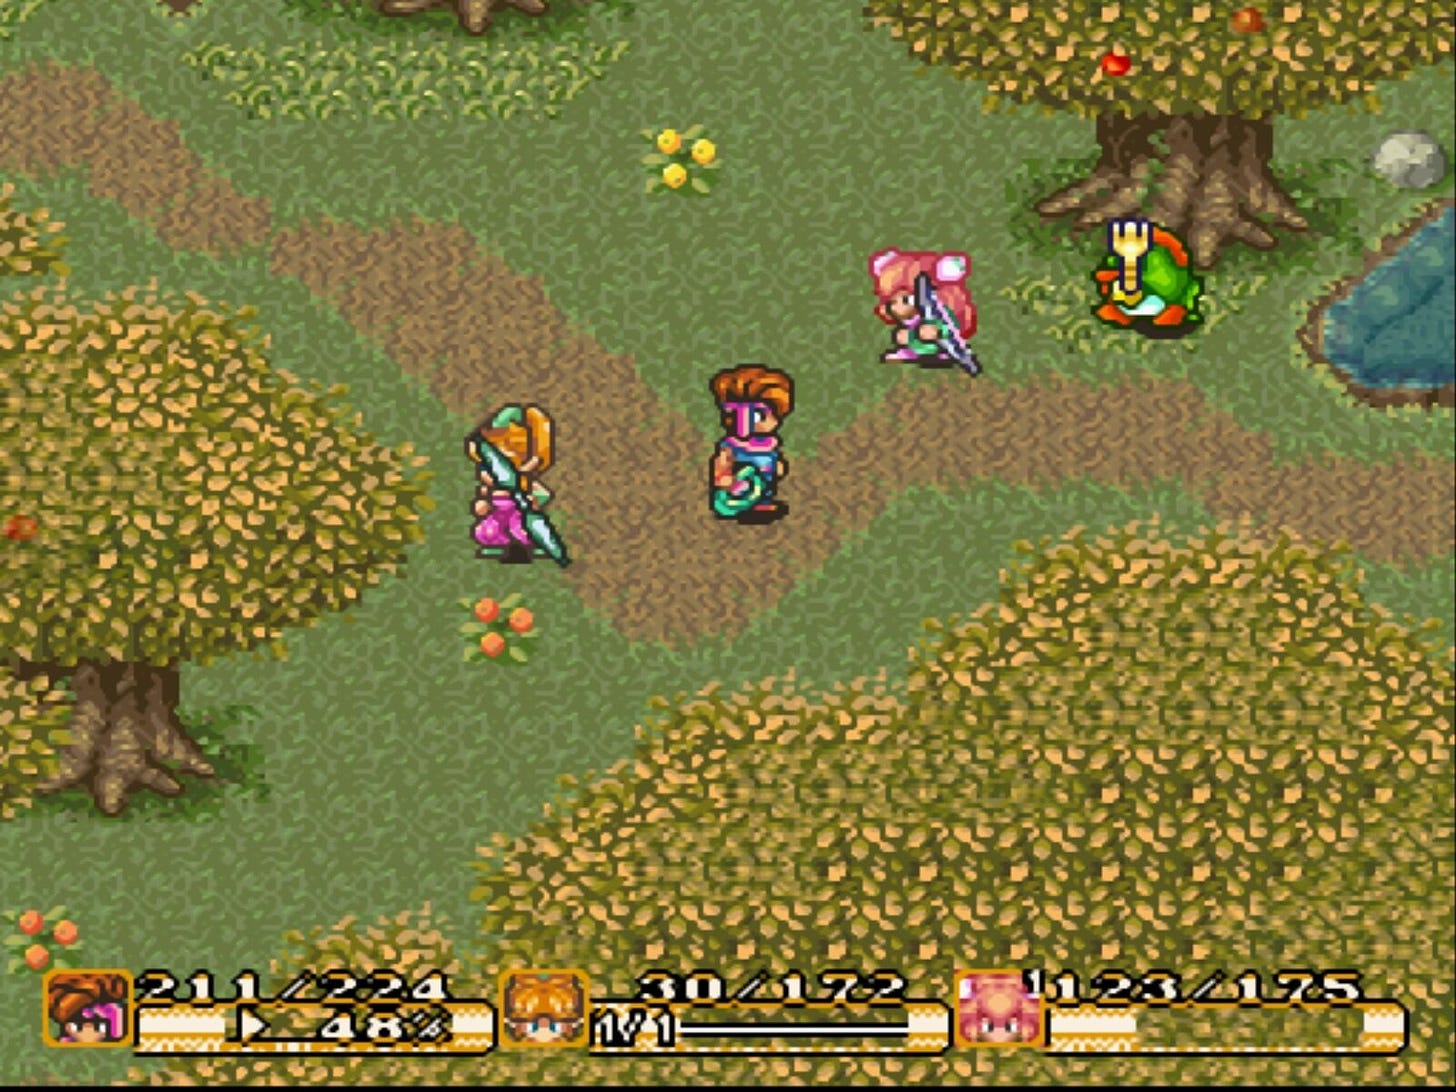 Picture from SNES game Secret of Mana